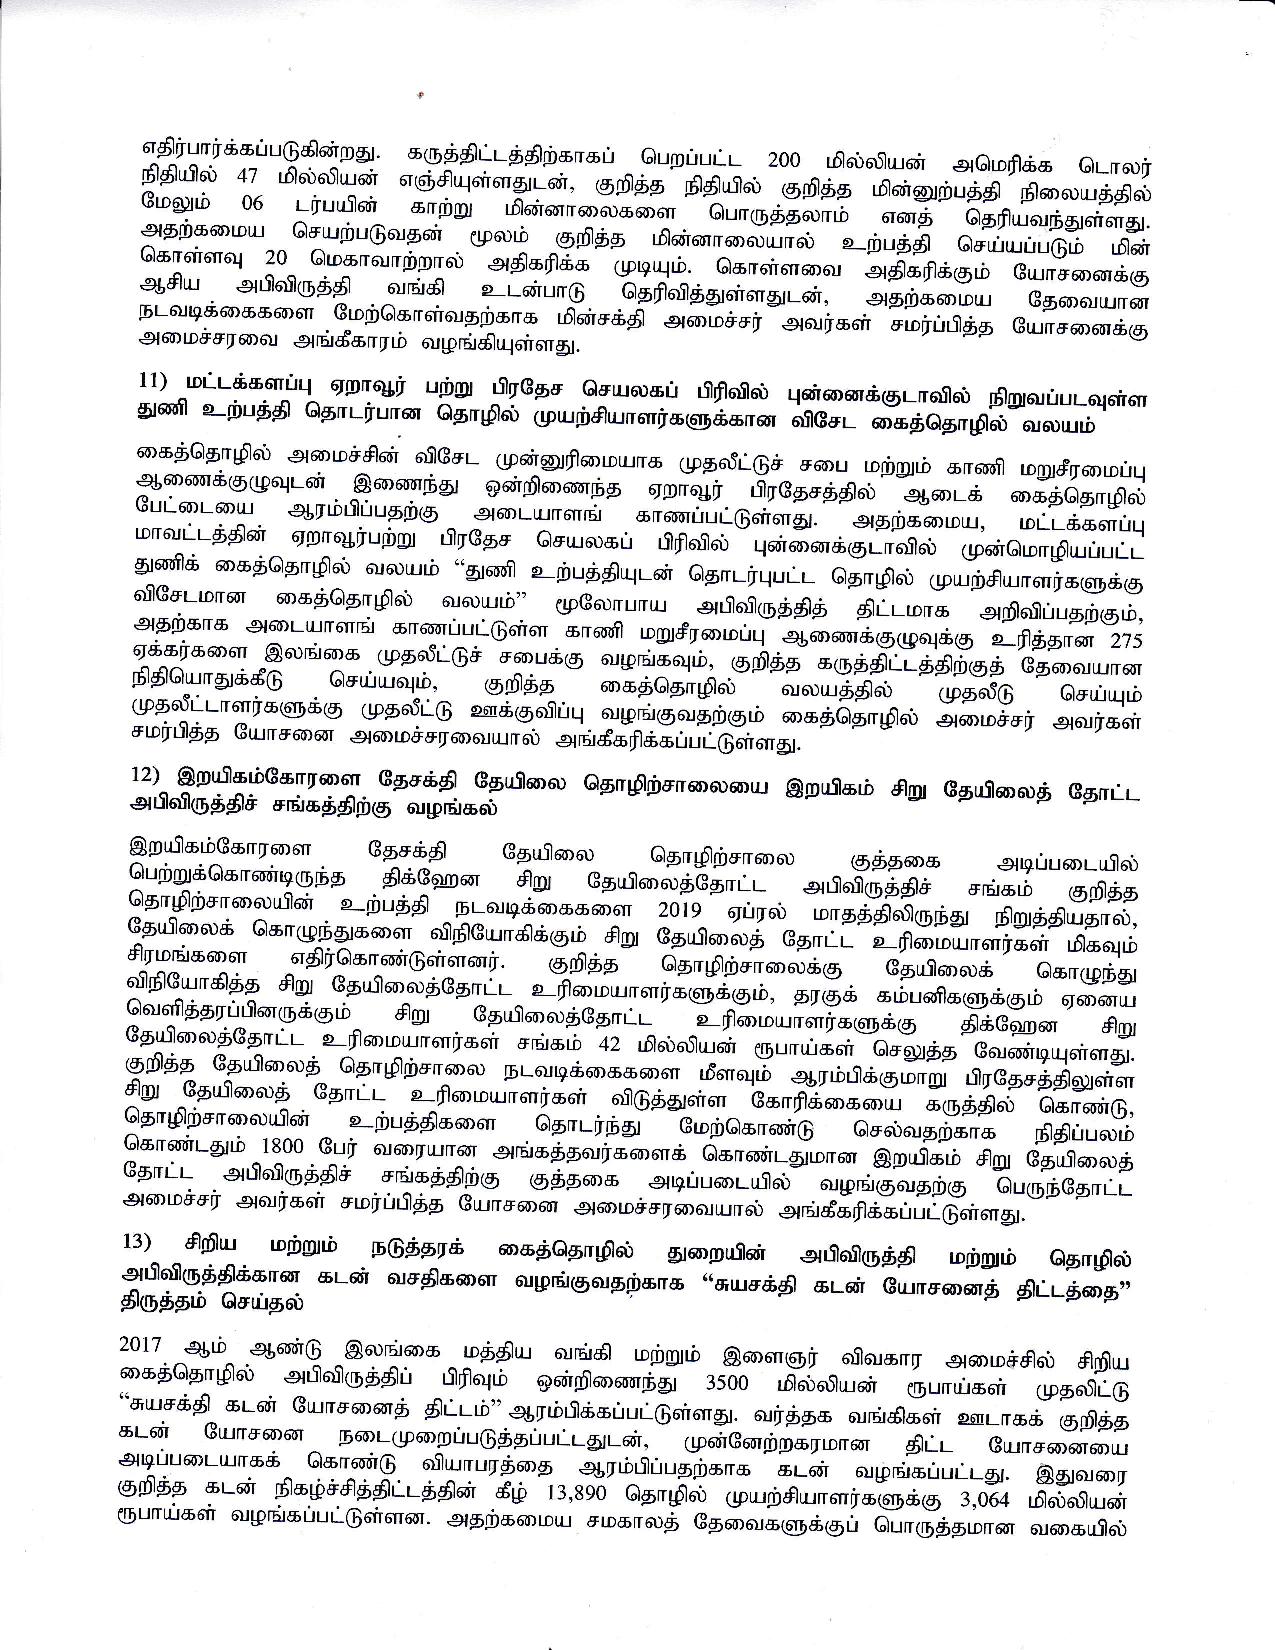 Cabinet Decision on 26.10.2020 Tamil page 004